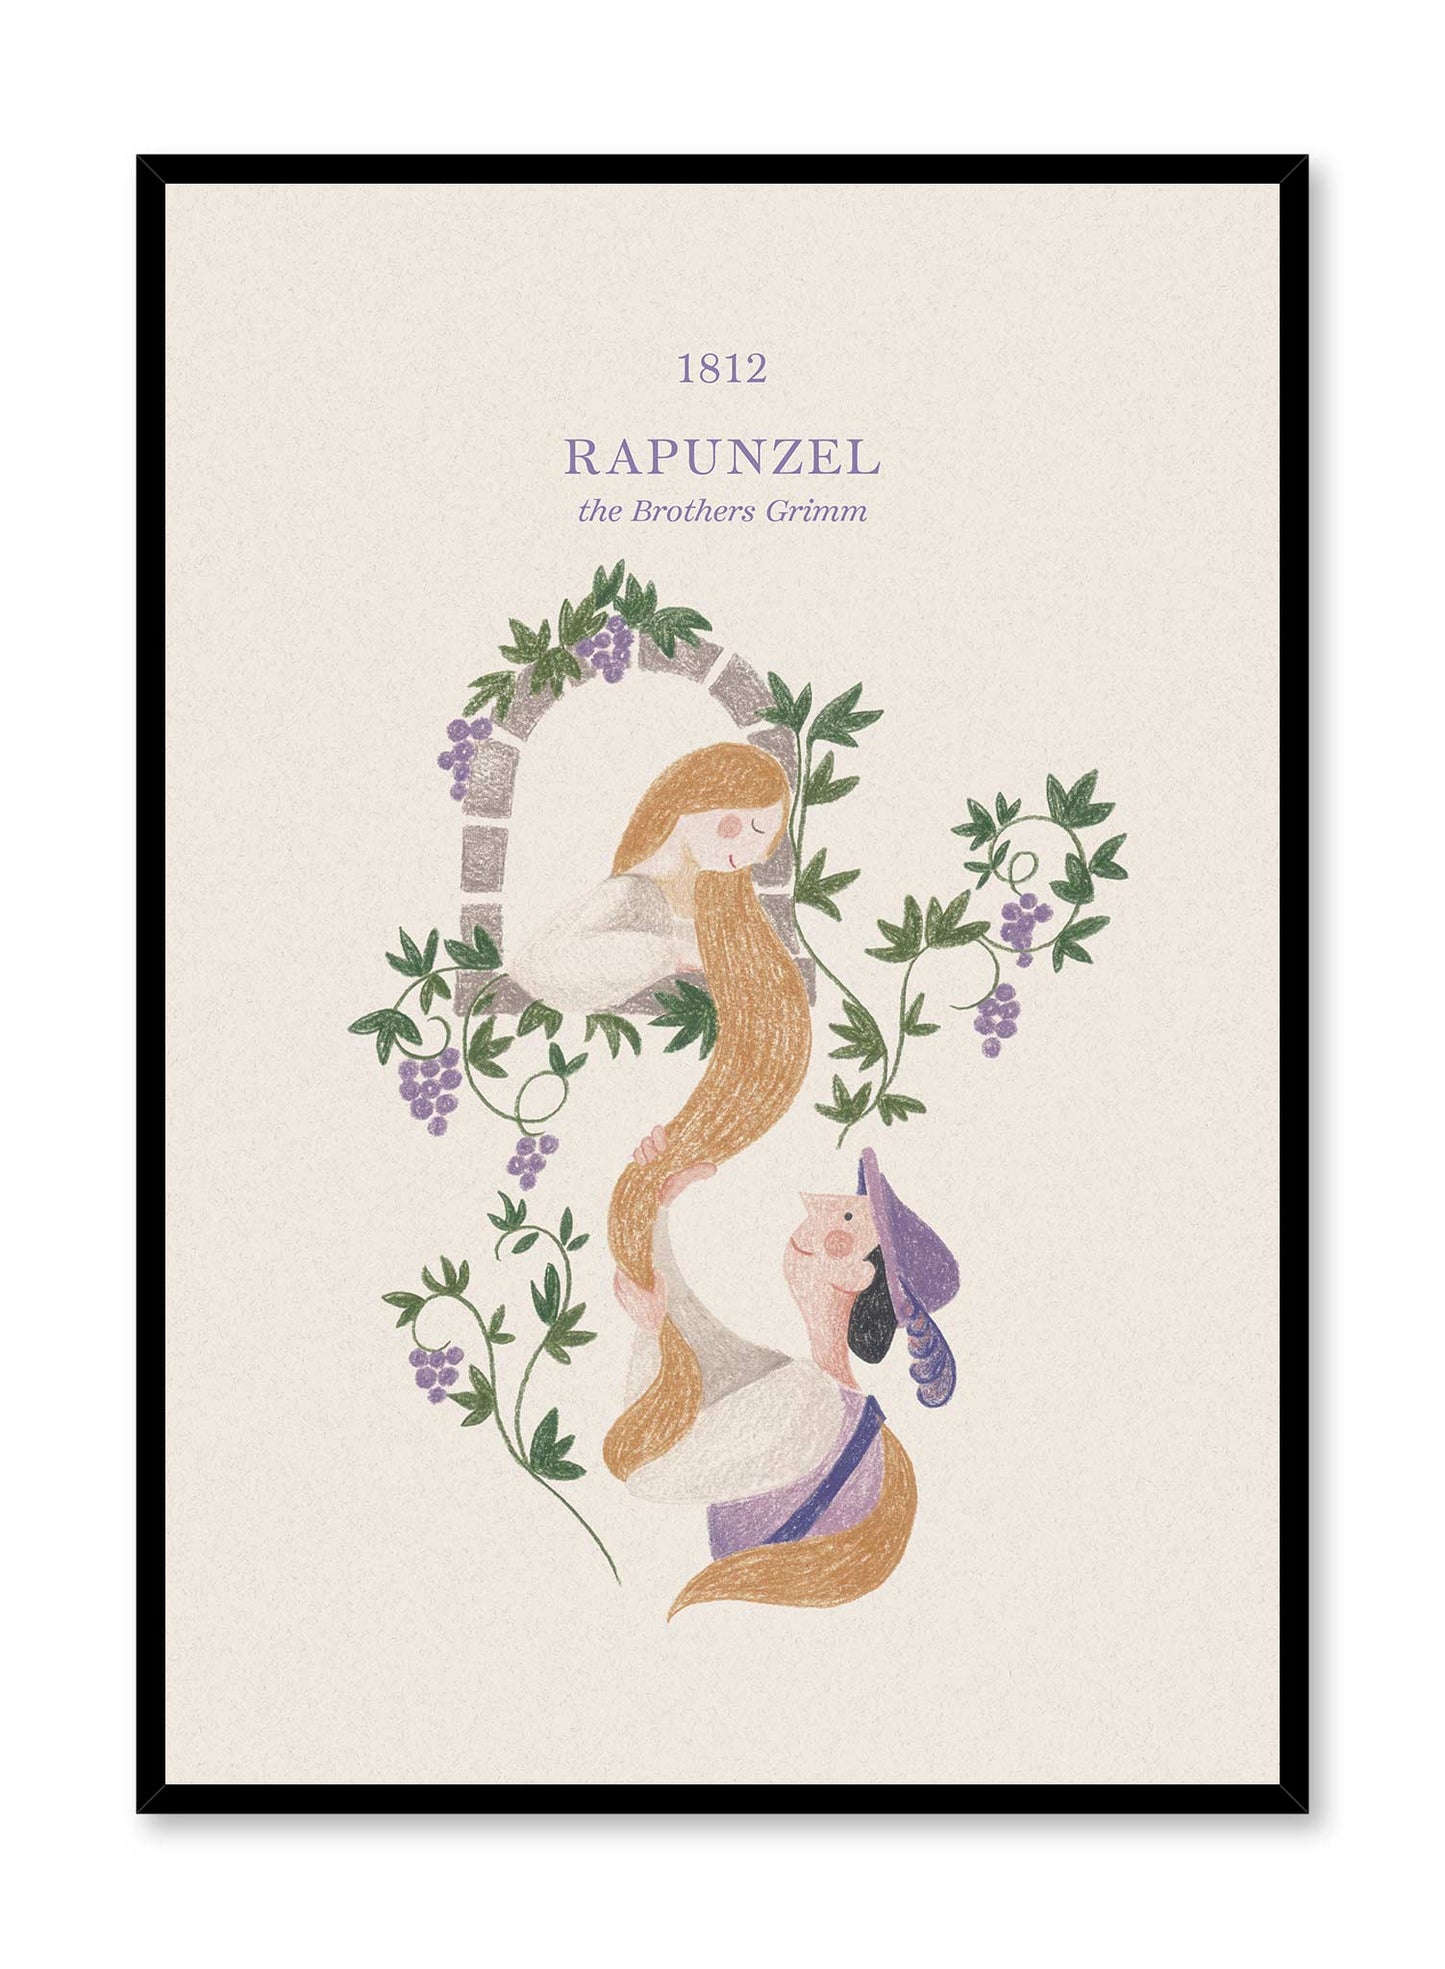 Rapunzel is a minimalist illustration by Opposite Wall of the Brothers Grimm's Rapunzel where the prince is grabbing her hair to save her from the tower.